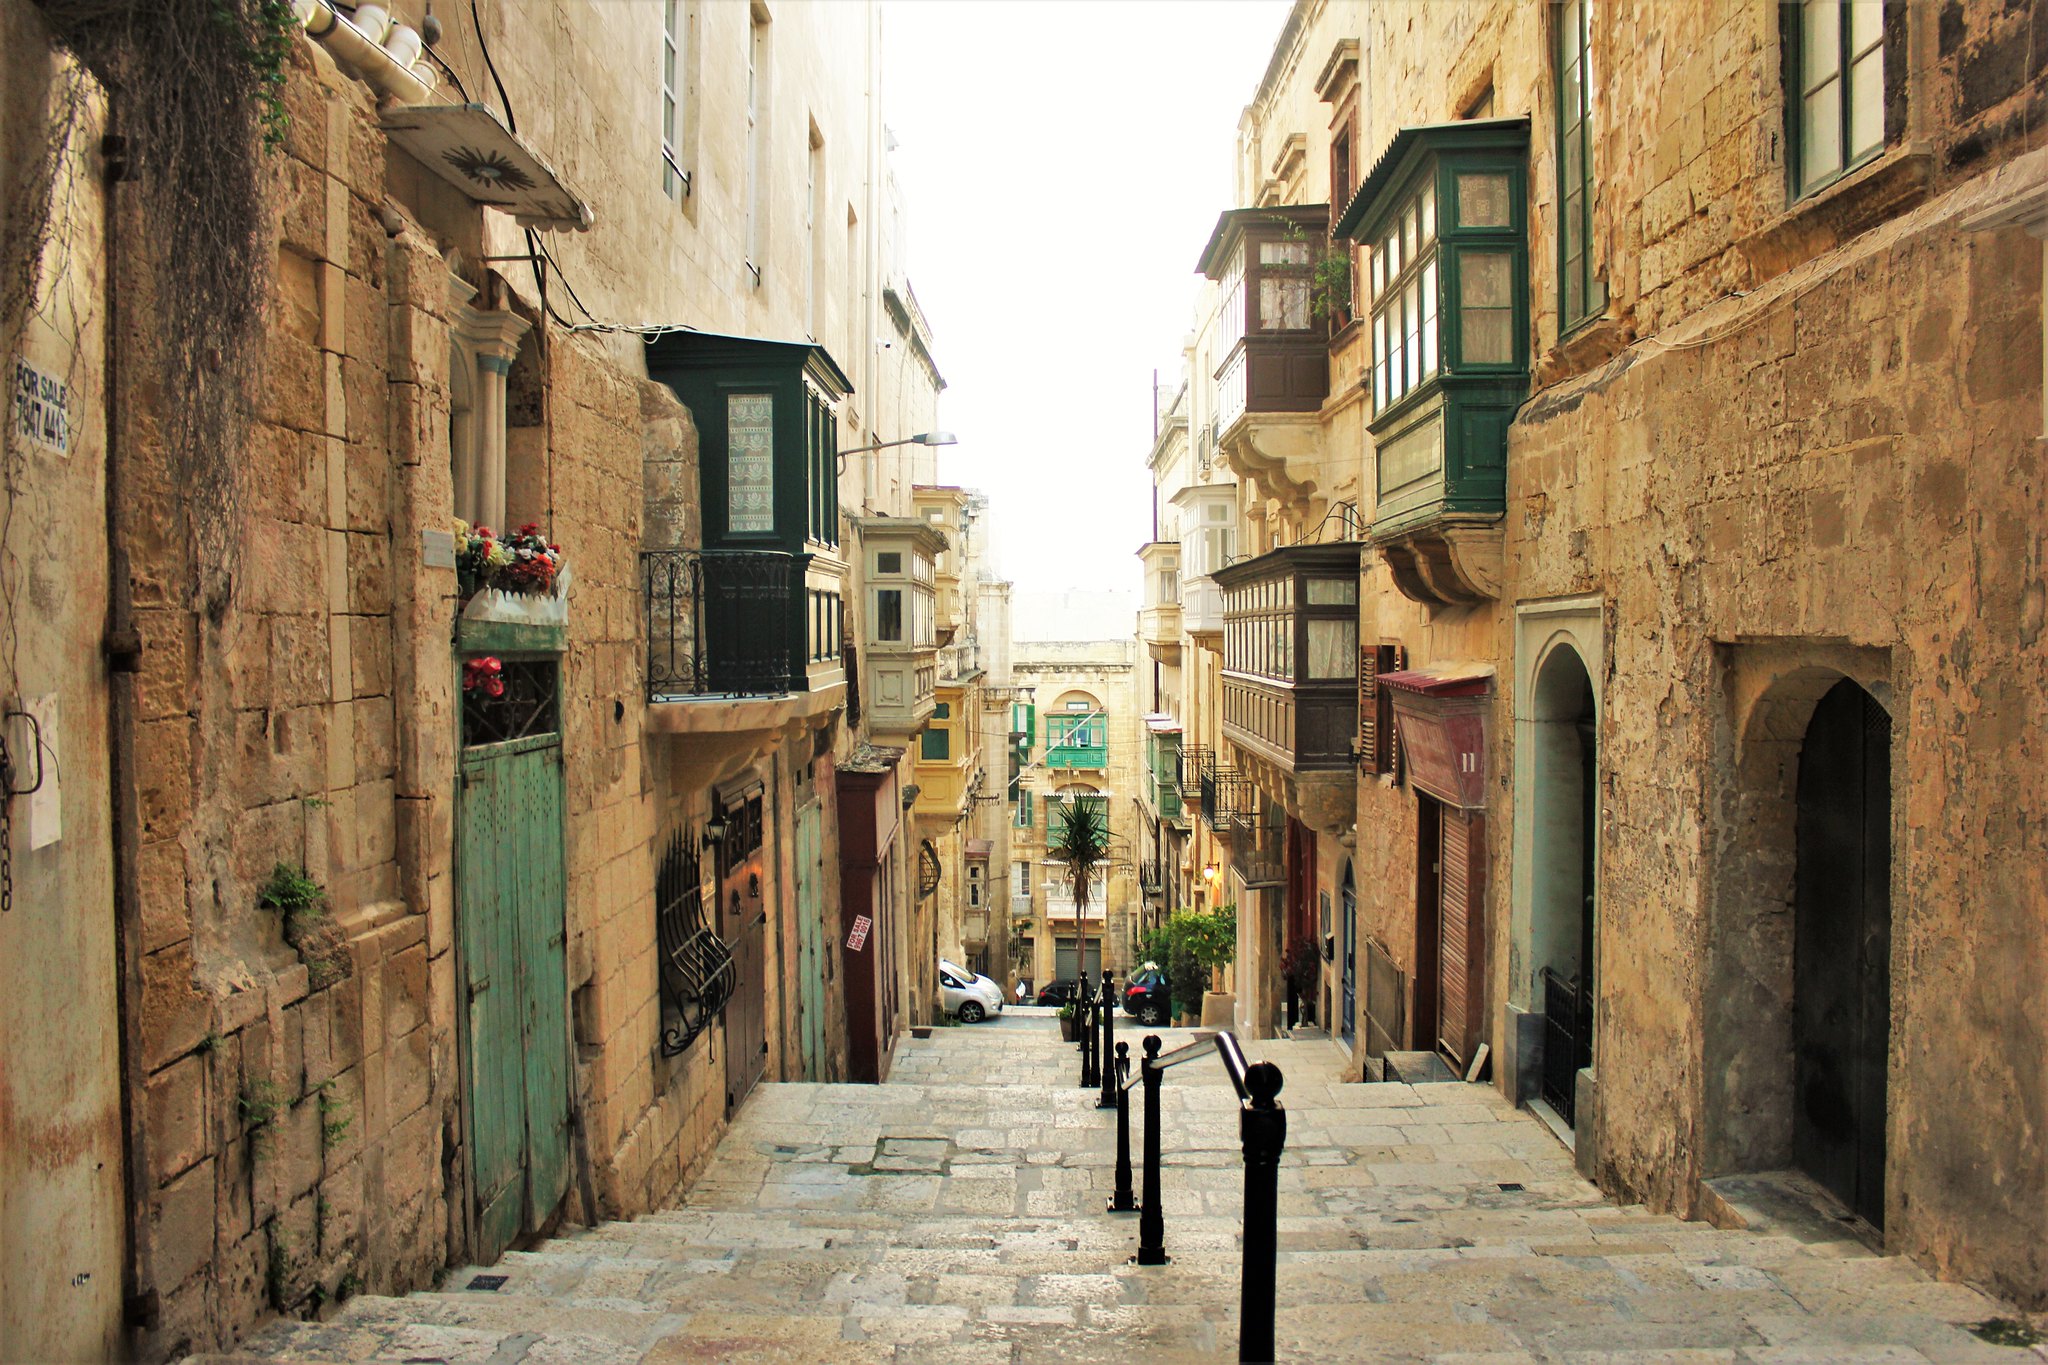 Top 10 Facts About Living Conditions in Malta